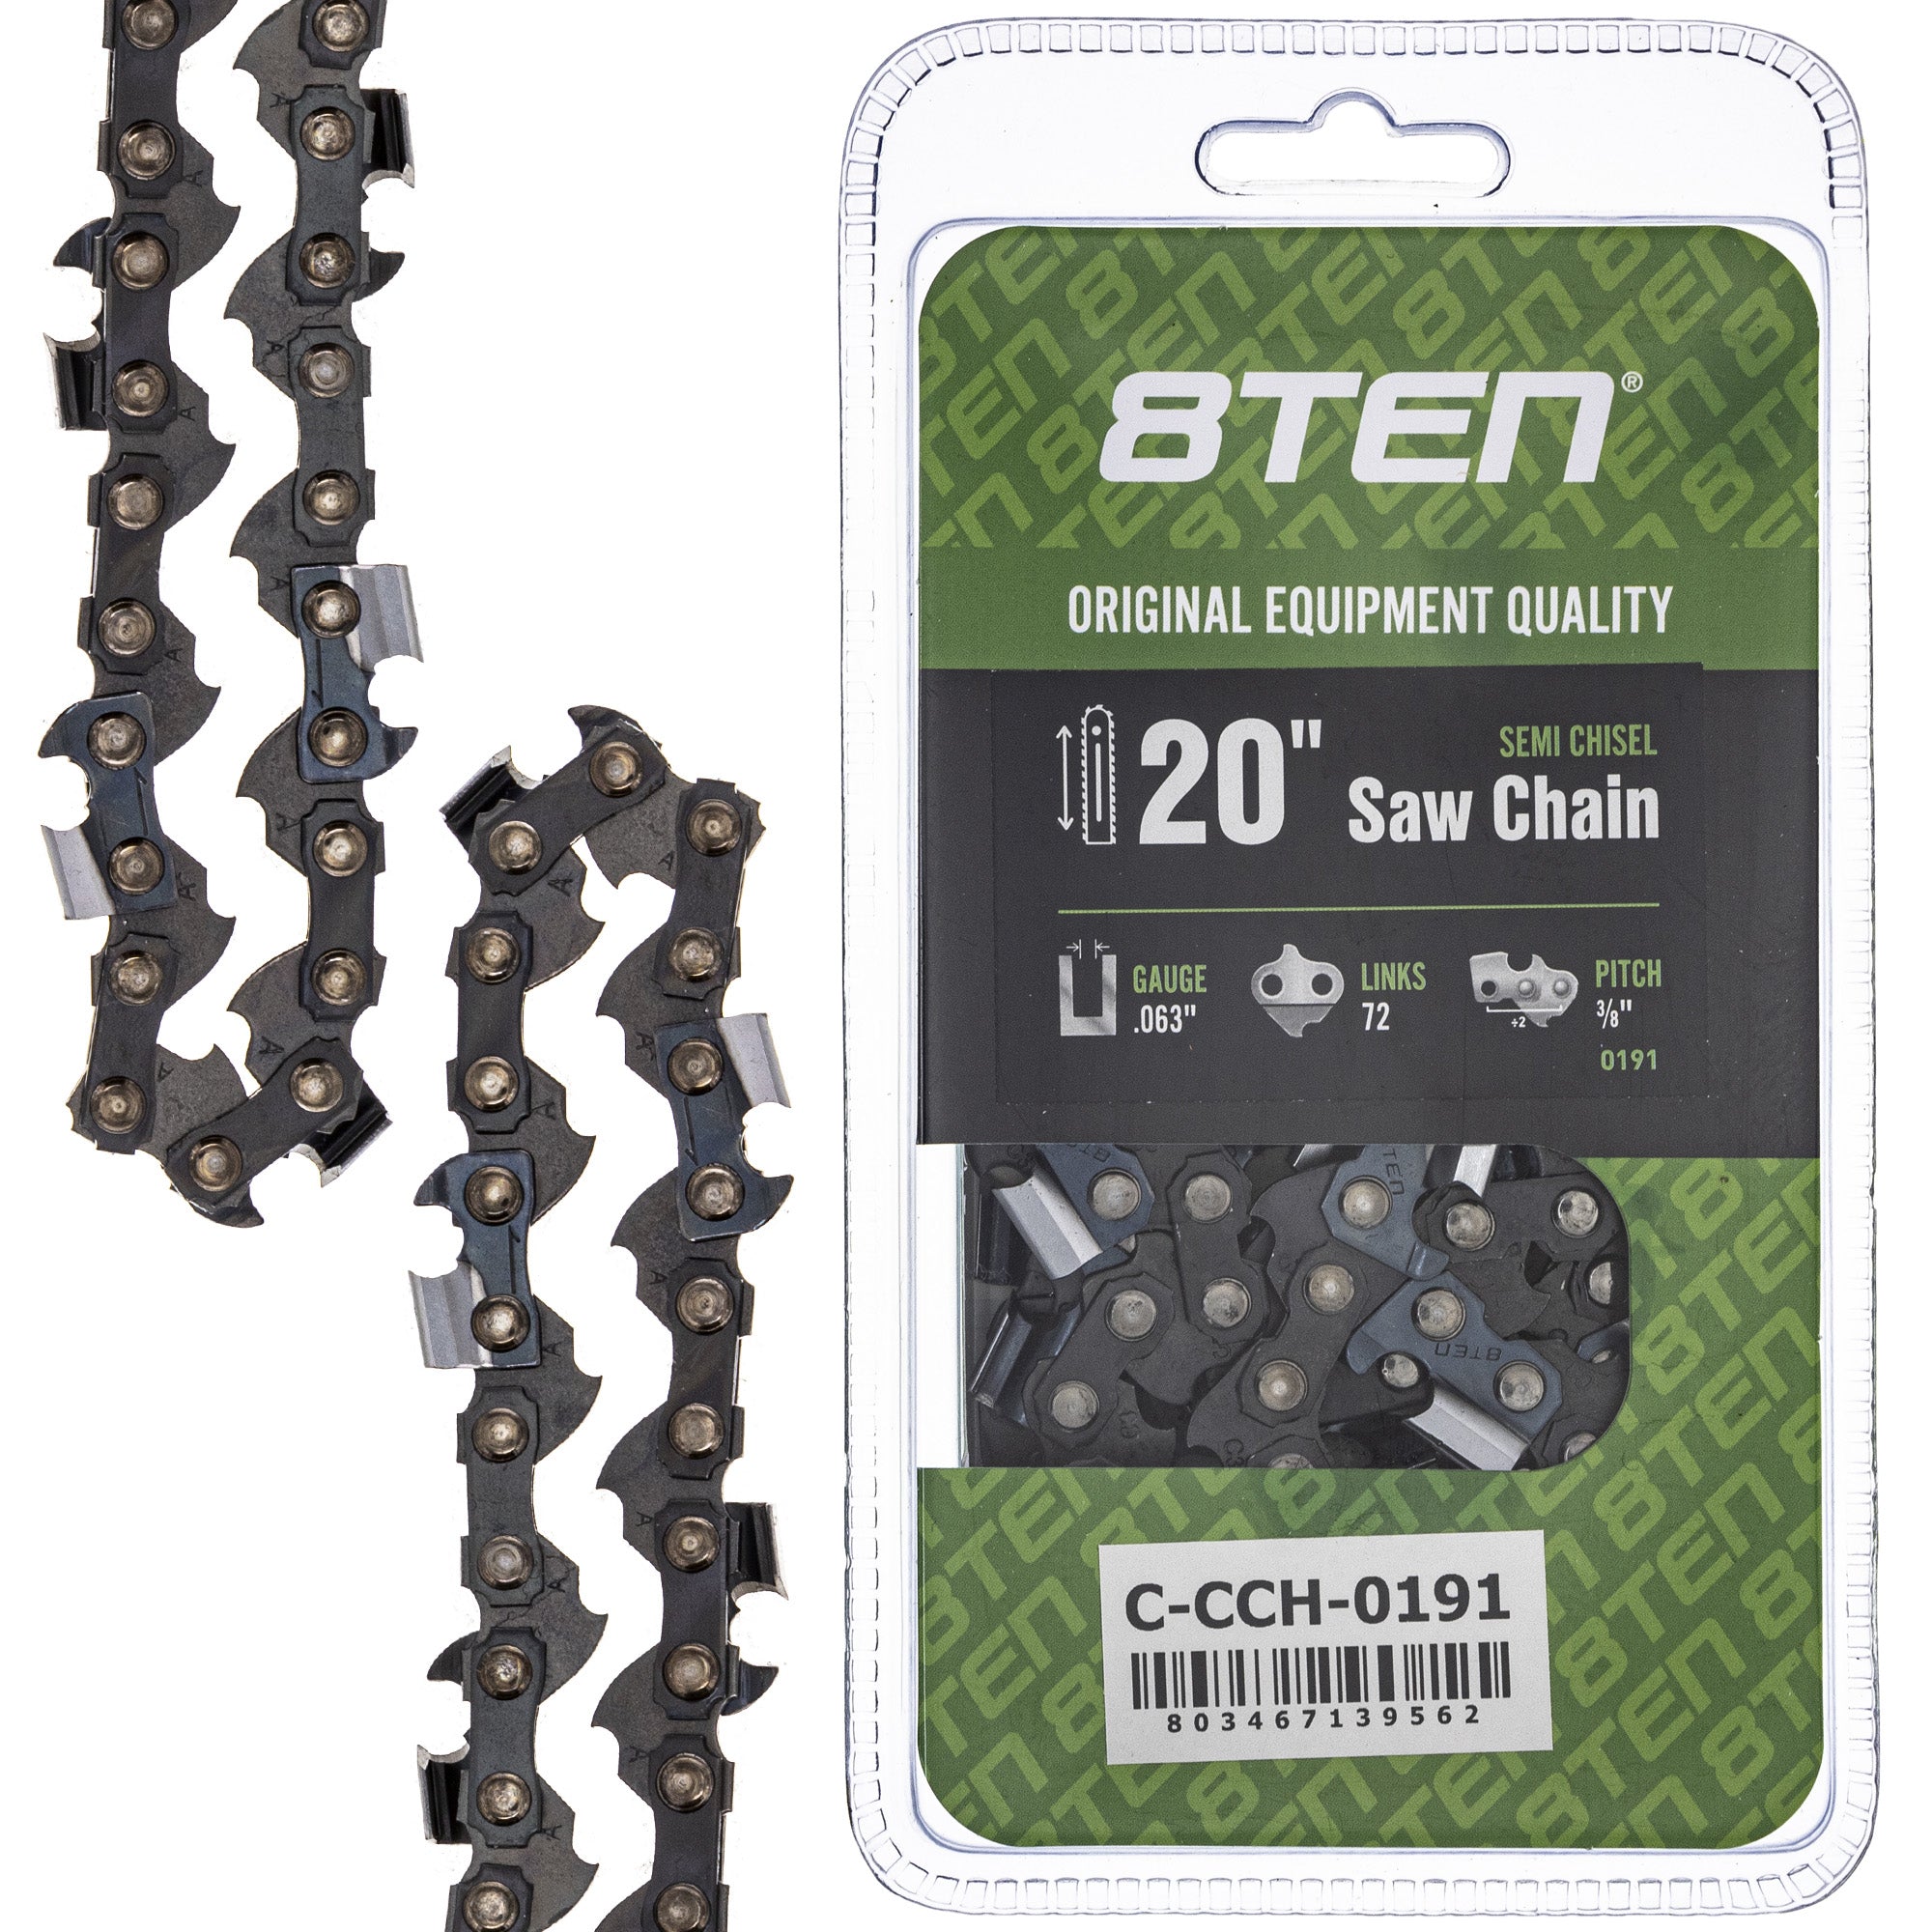 8TEN MK1010408 Guide Bar & Chain for MSE MS E 066